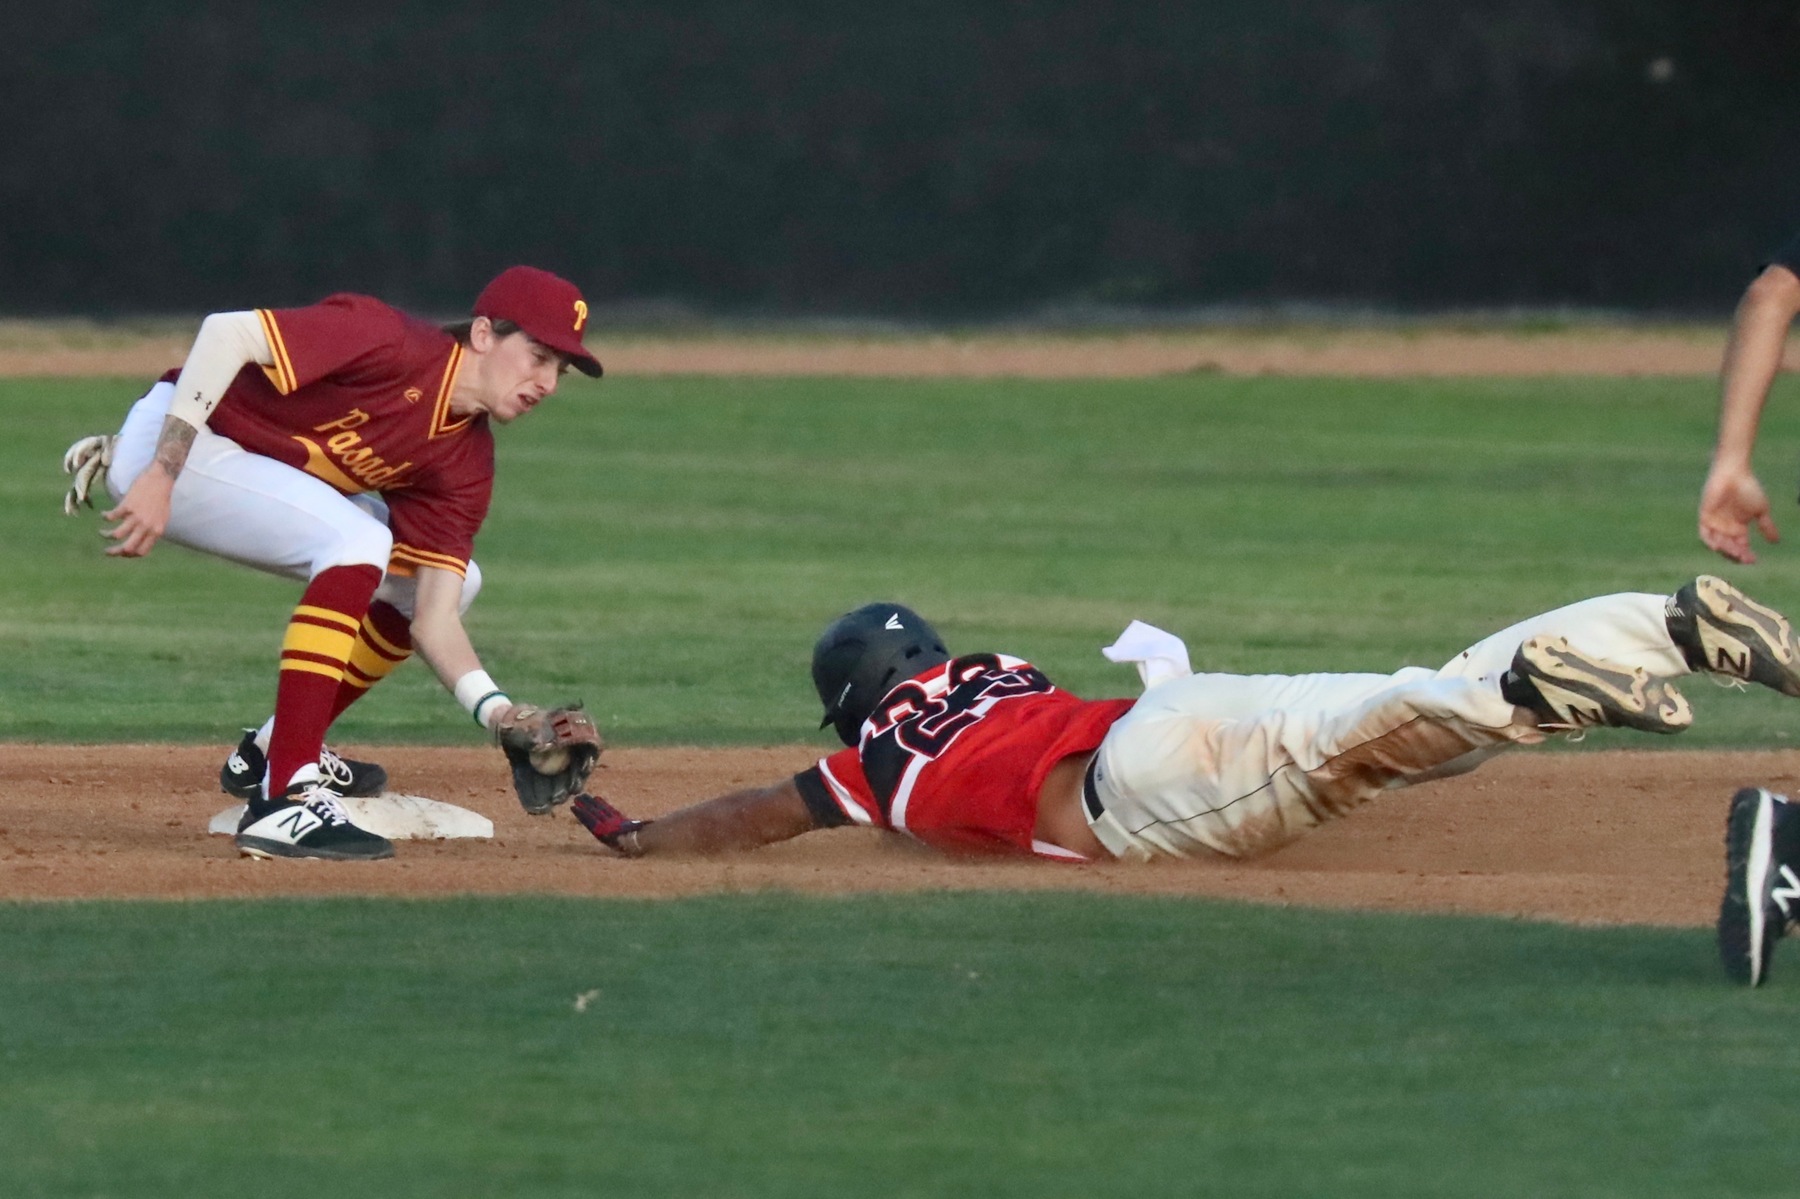 Lancers shortstop Jacob Ogle applies the tag on a Pierce baserunner during the team's game on Thursday, photo by Michael Watkins.